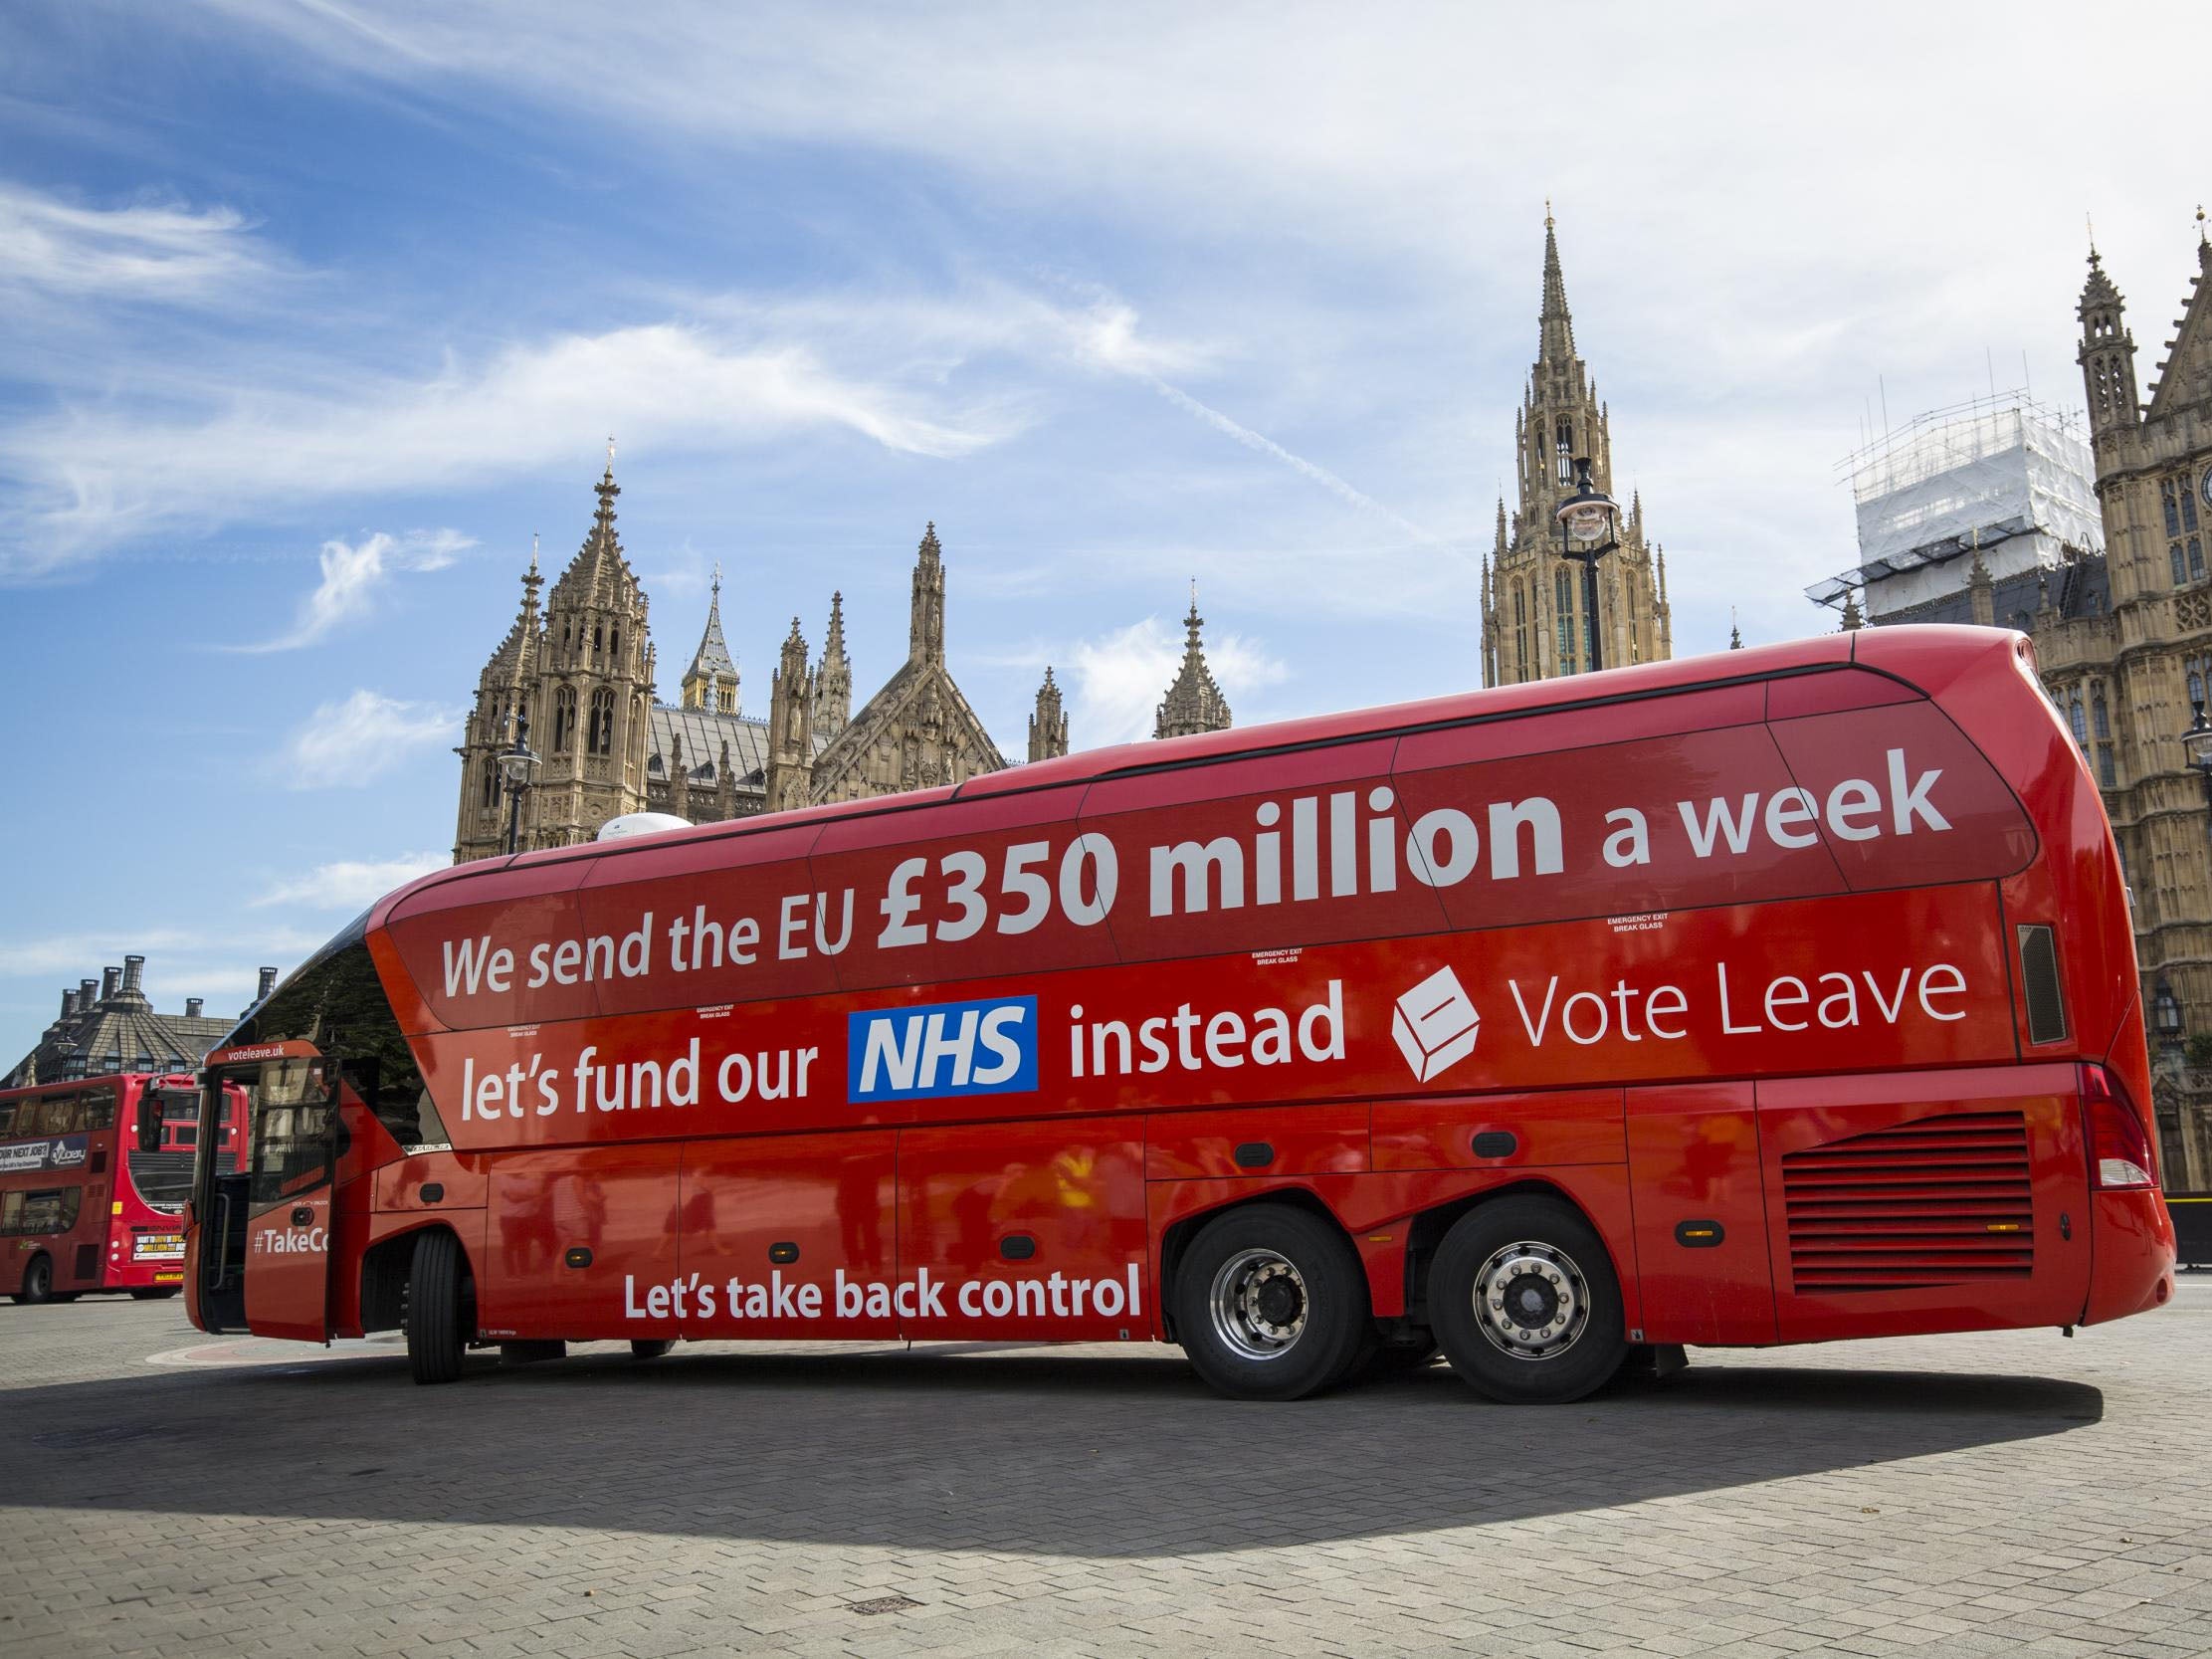 The Vote Leave battle bus and its infamous claim was widely seen during the 2016 referendum